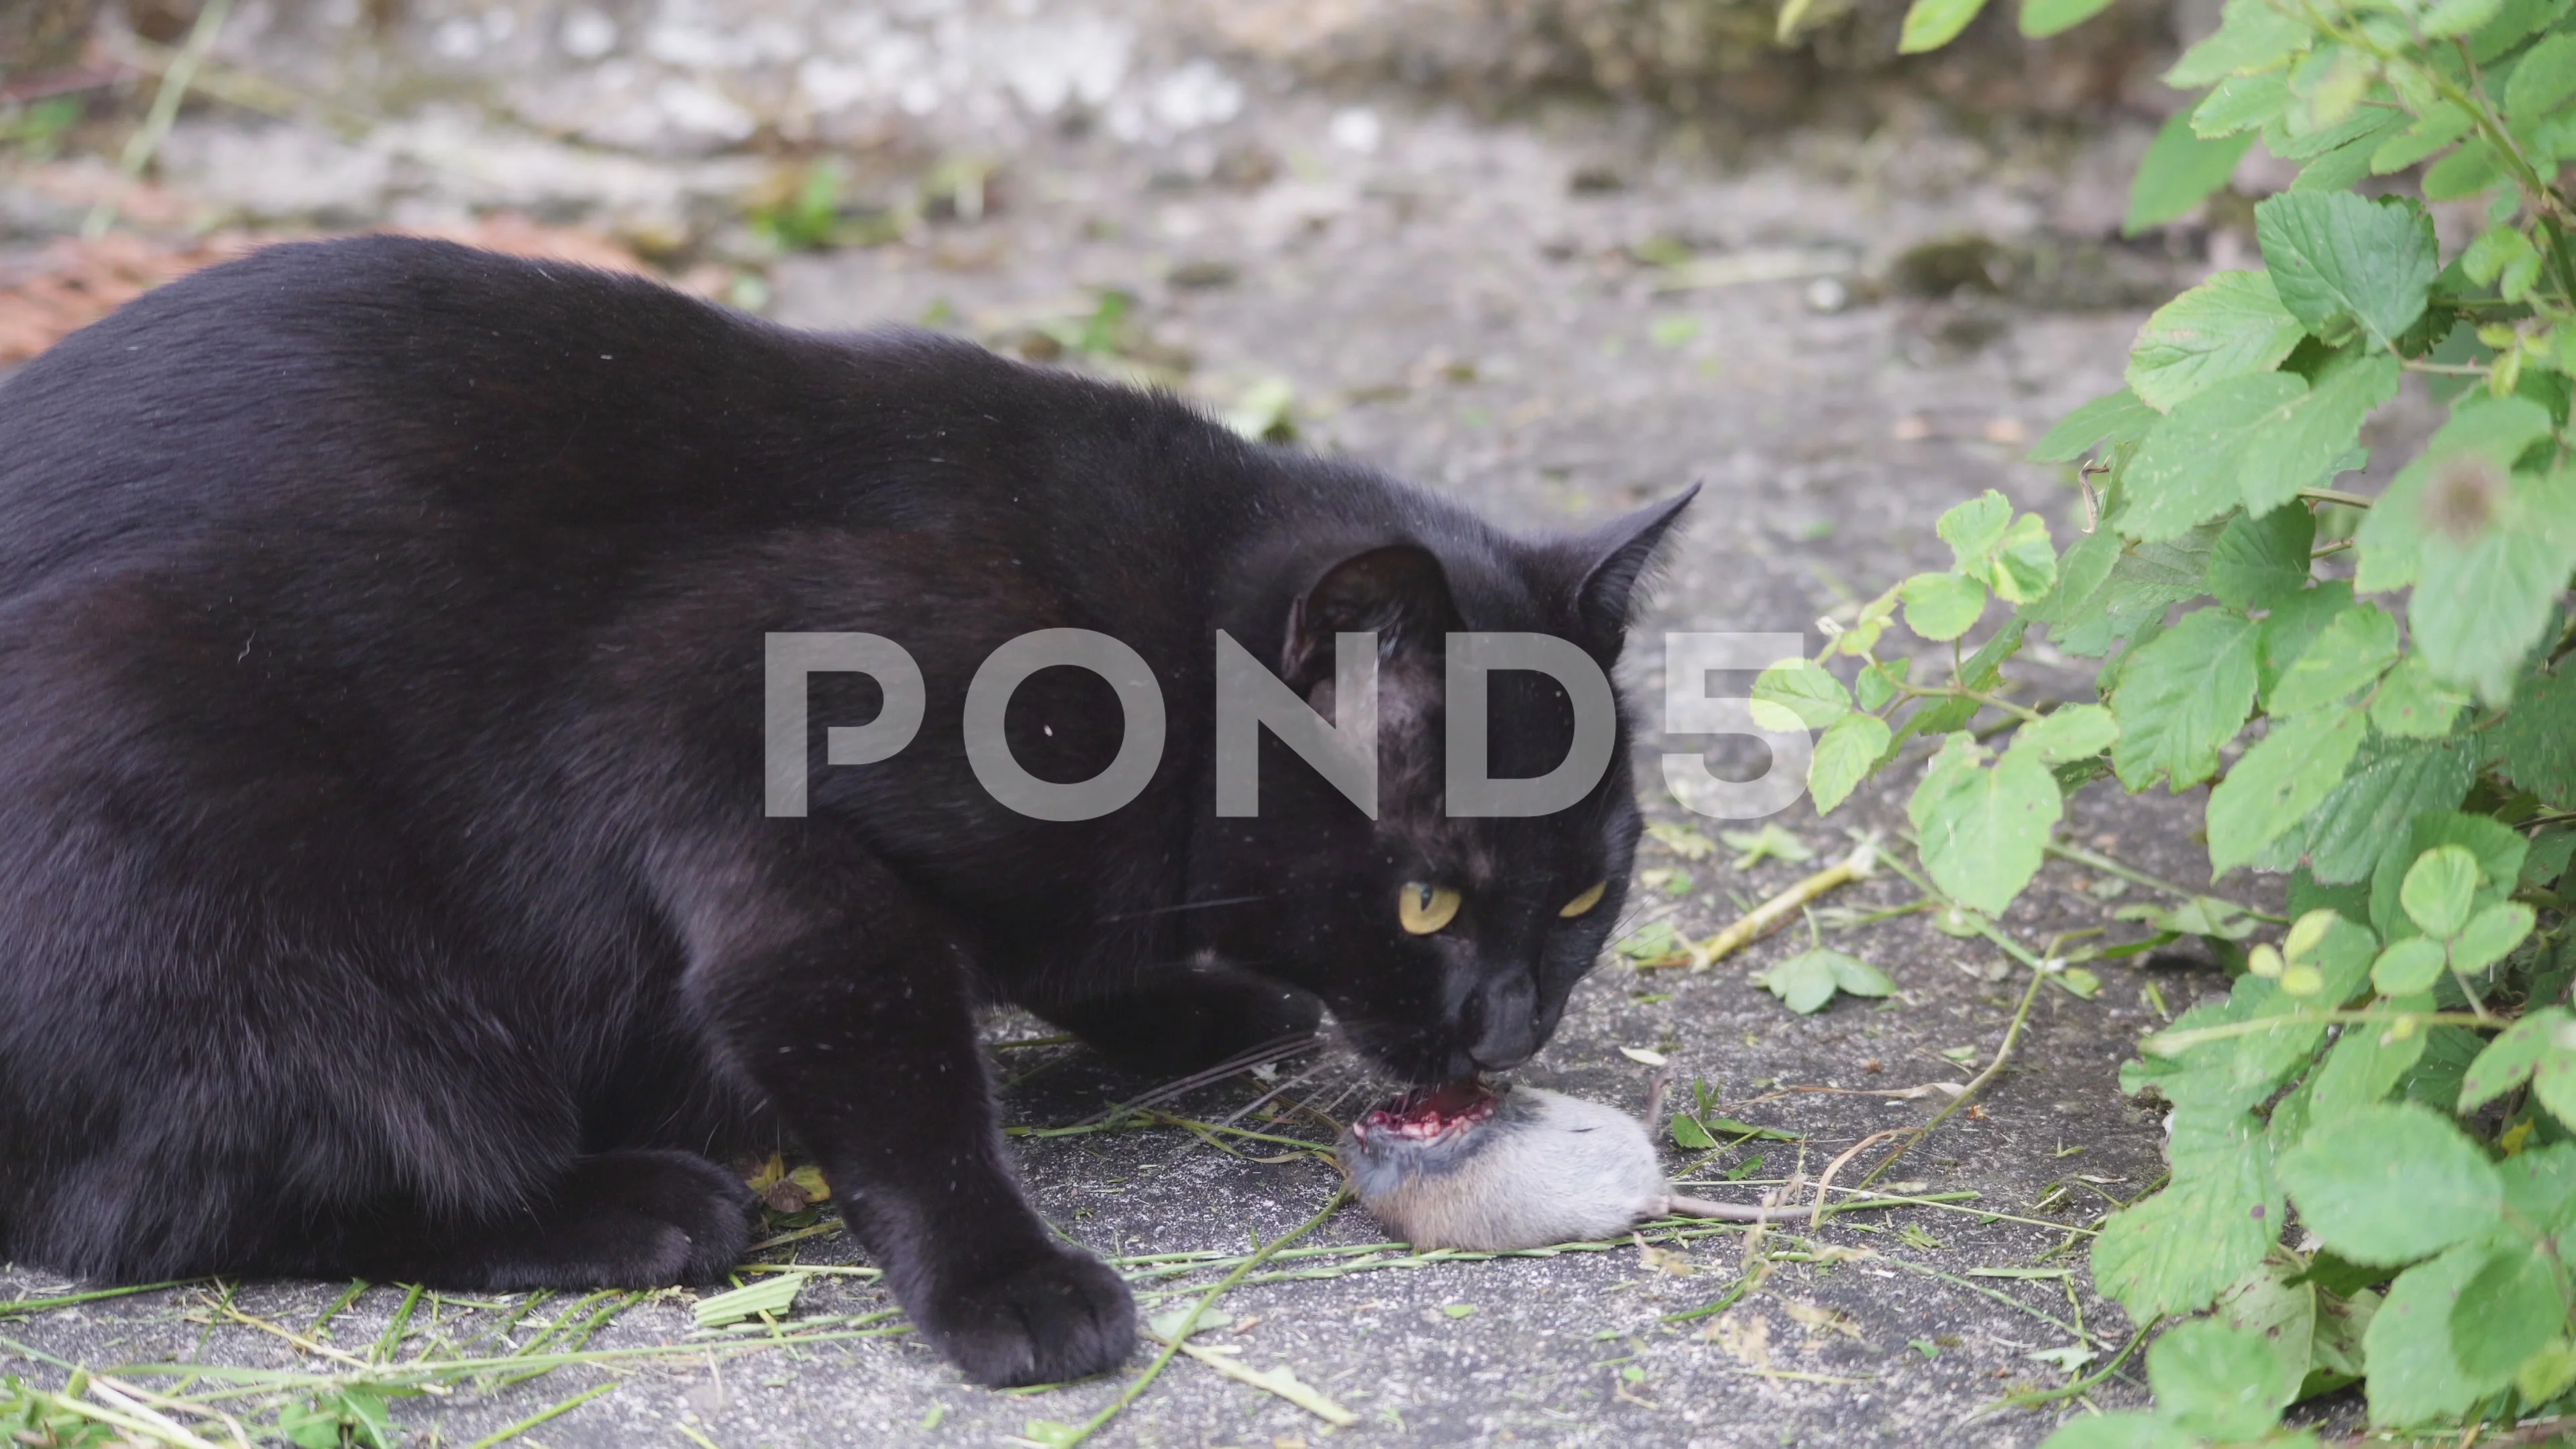 black cat eating mouse